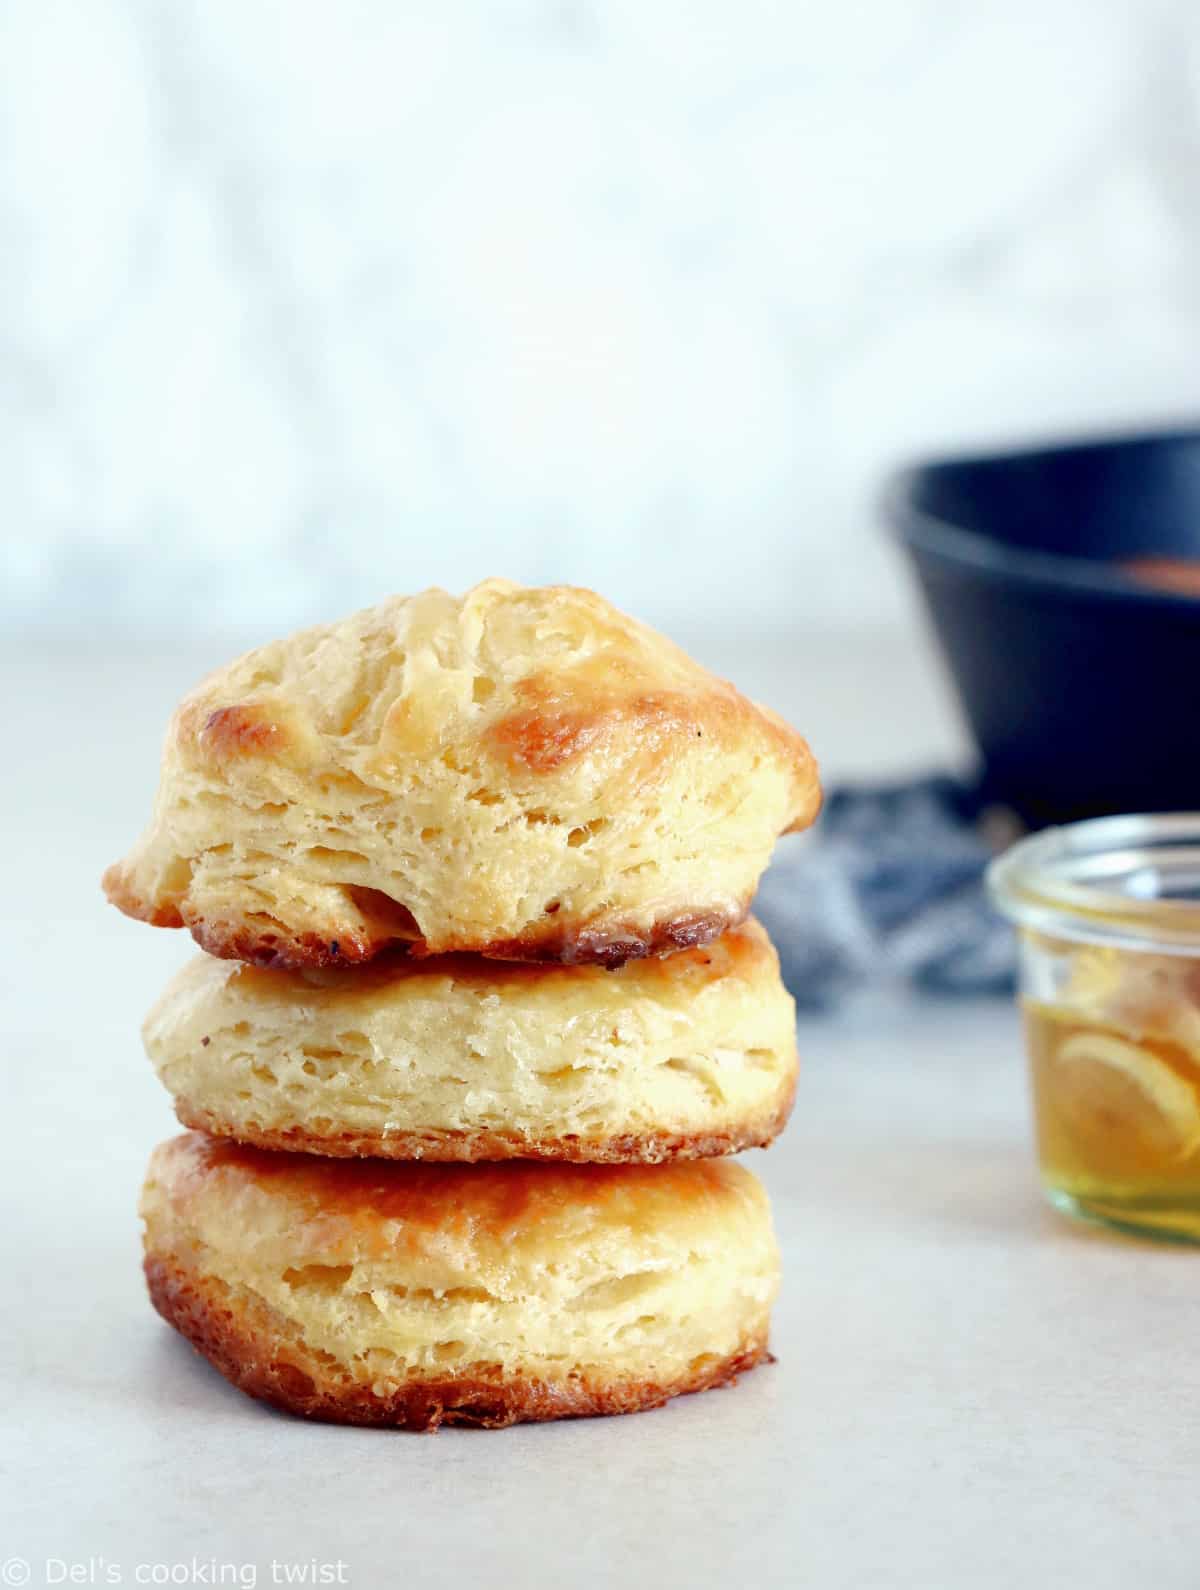 Incredibly soft, flaky and buttery, this easy buttermilk biscuits recipe is definitely a keeper.